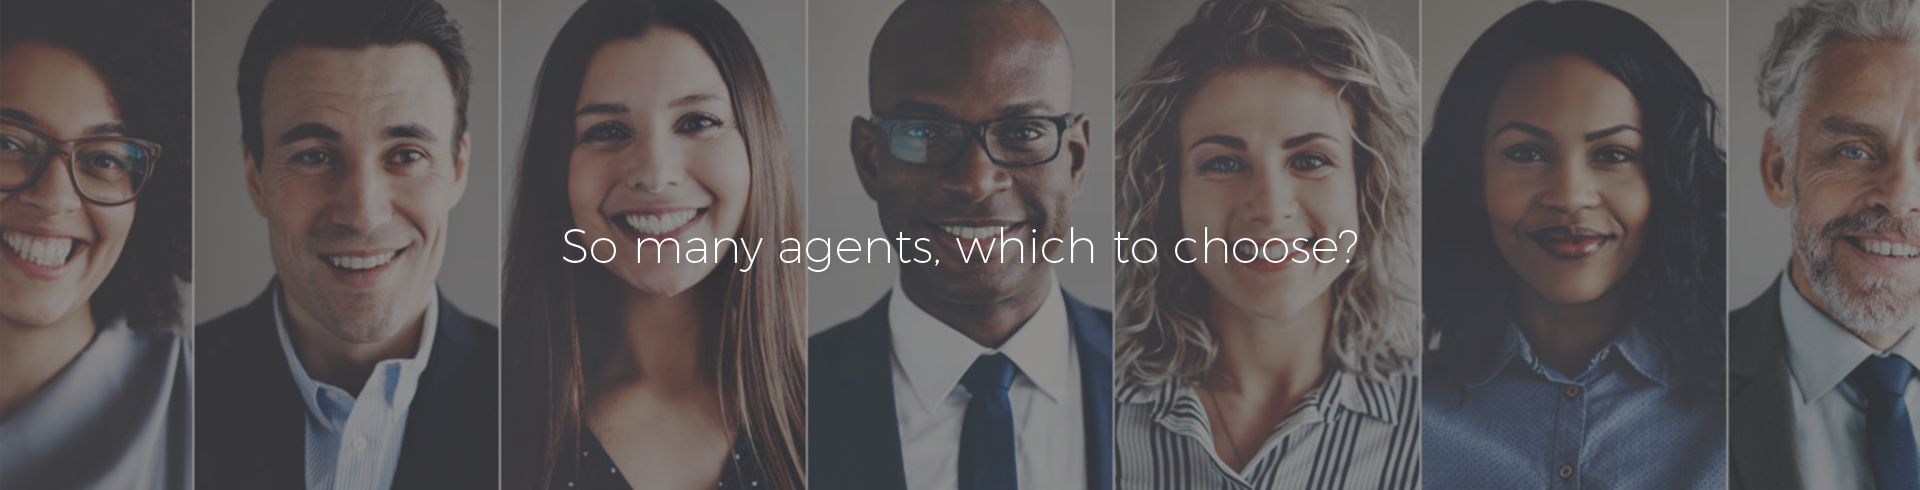 So Many Agents. Which to choose?